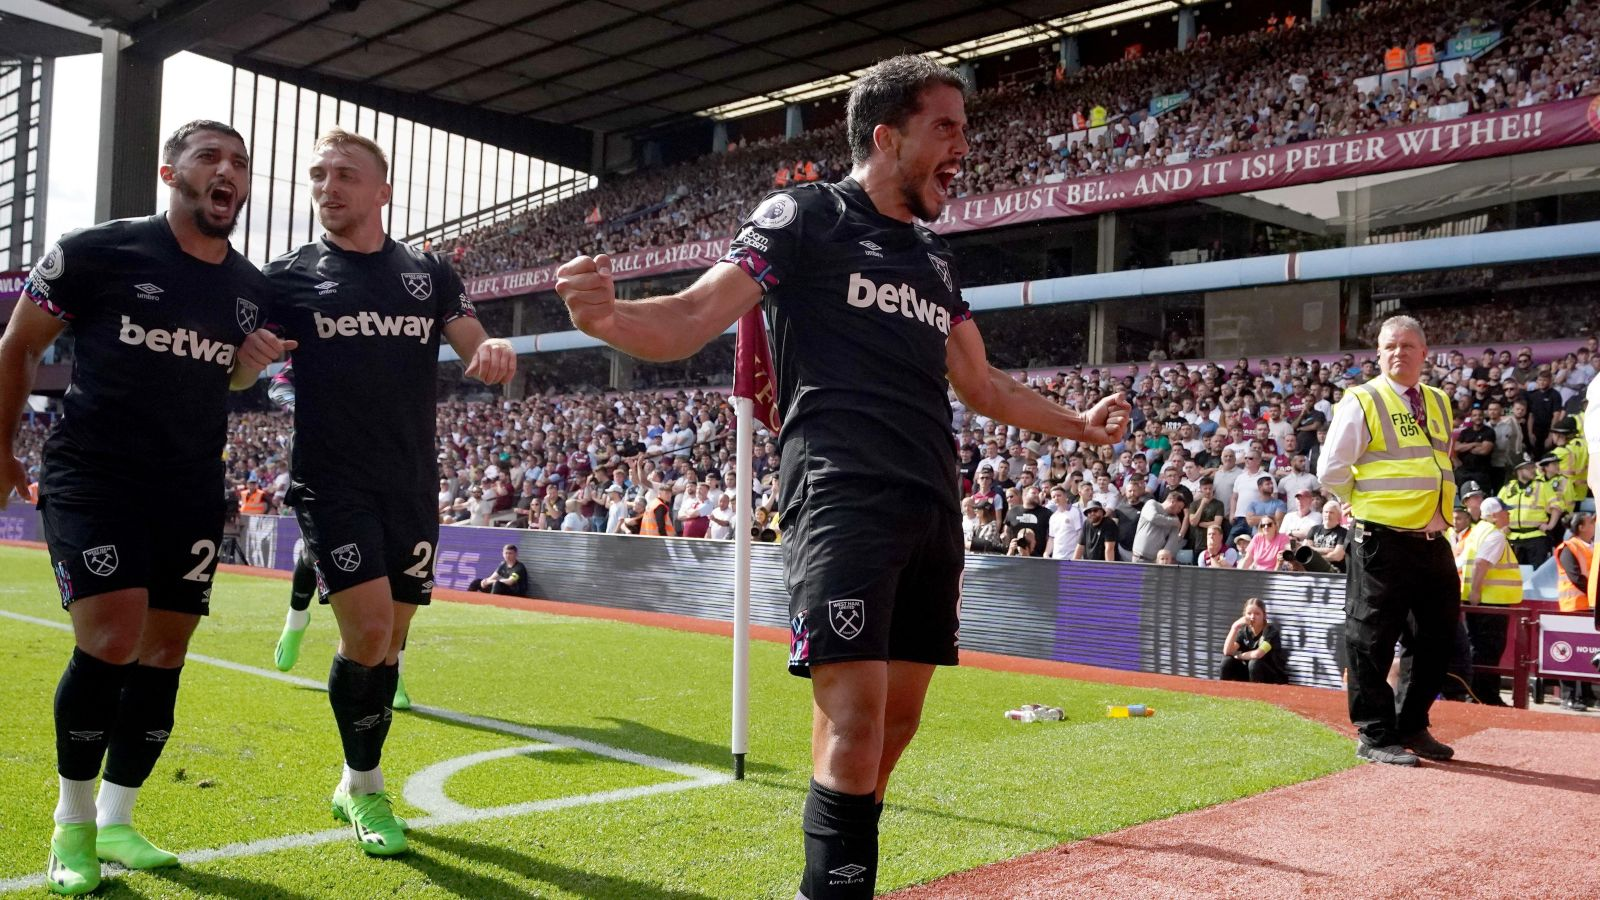 Aston Villa 0-1 West Ham: Deflected Pablo Fornals goal gives Hammers narrow win in Birmingham